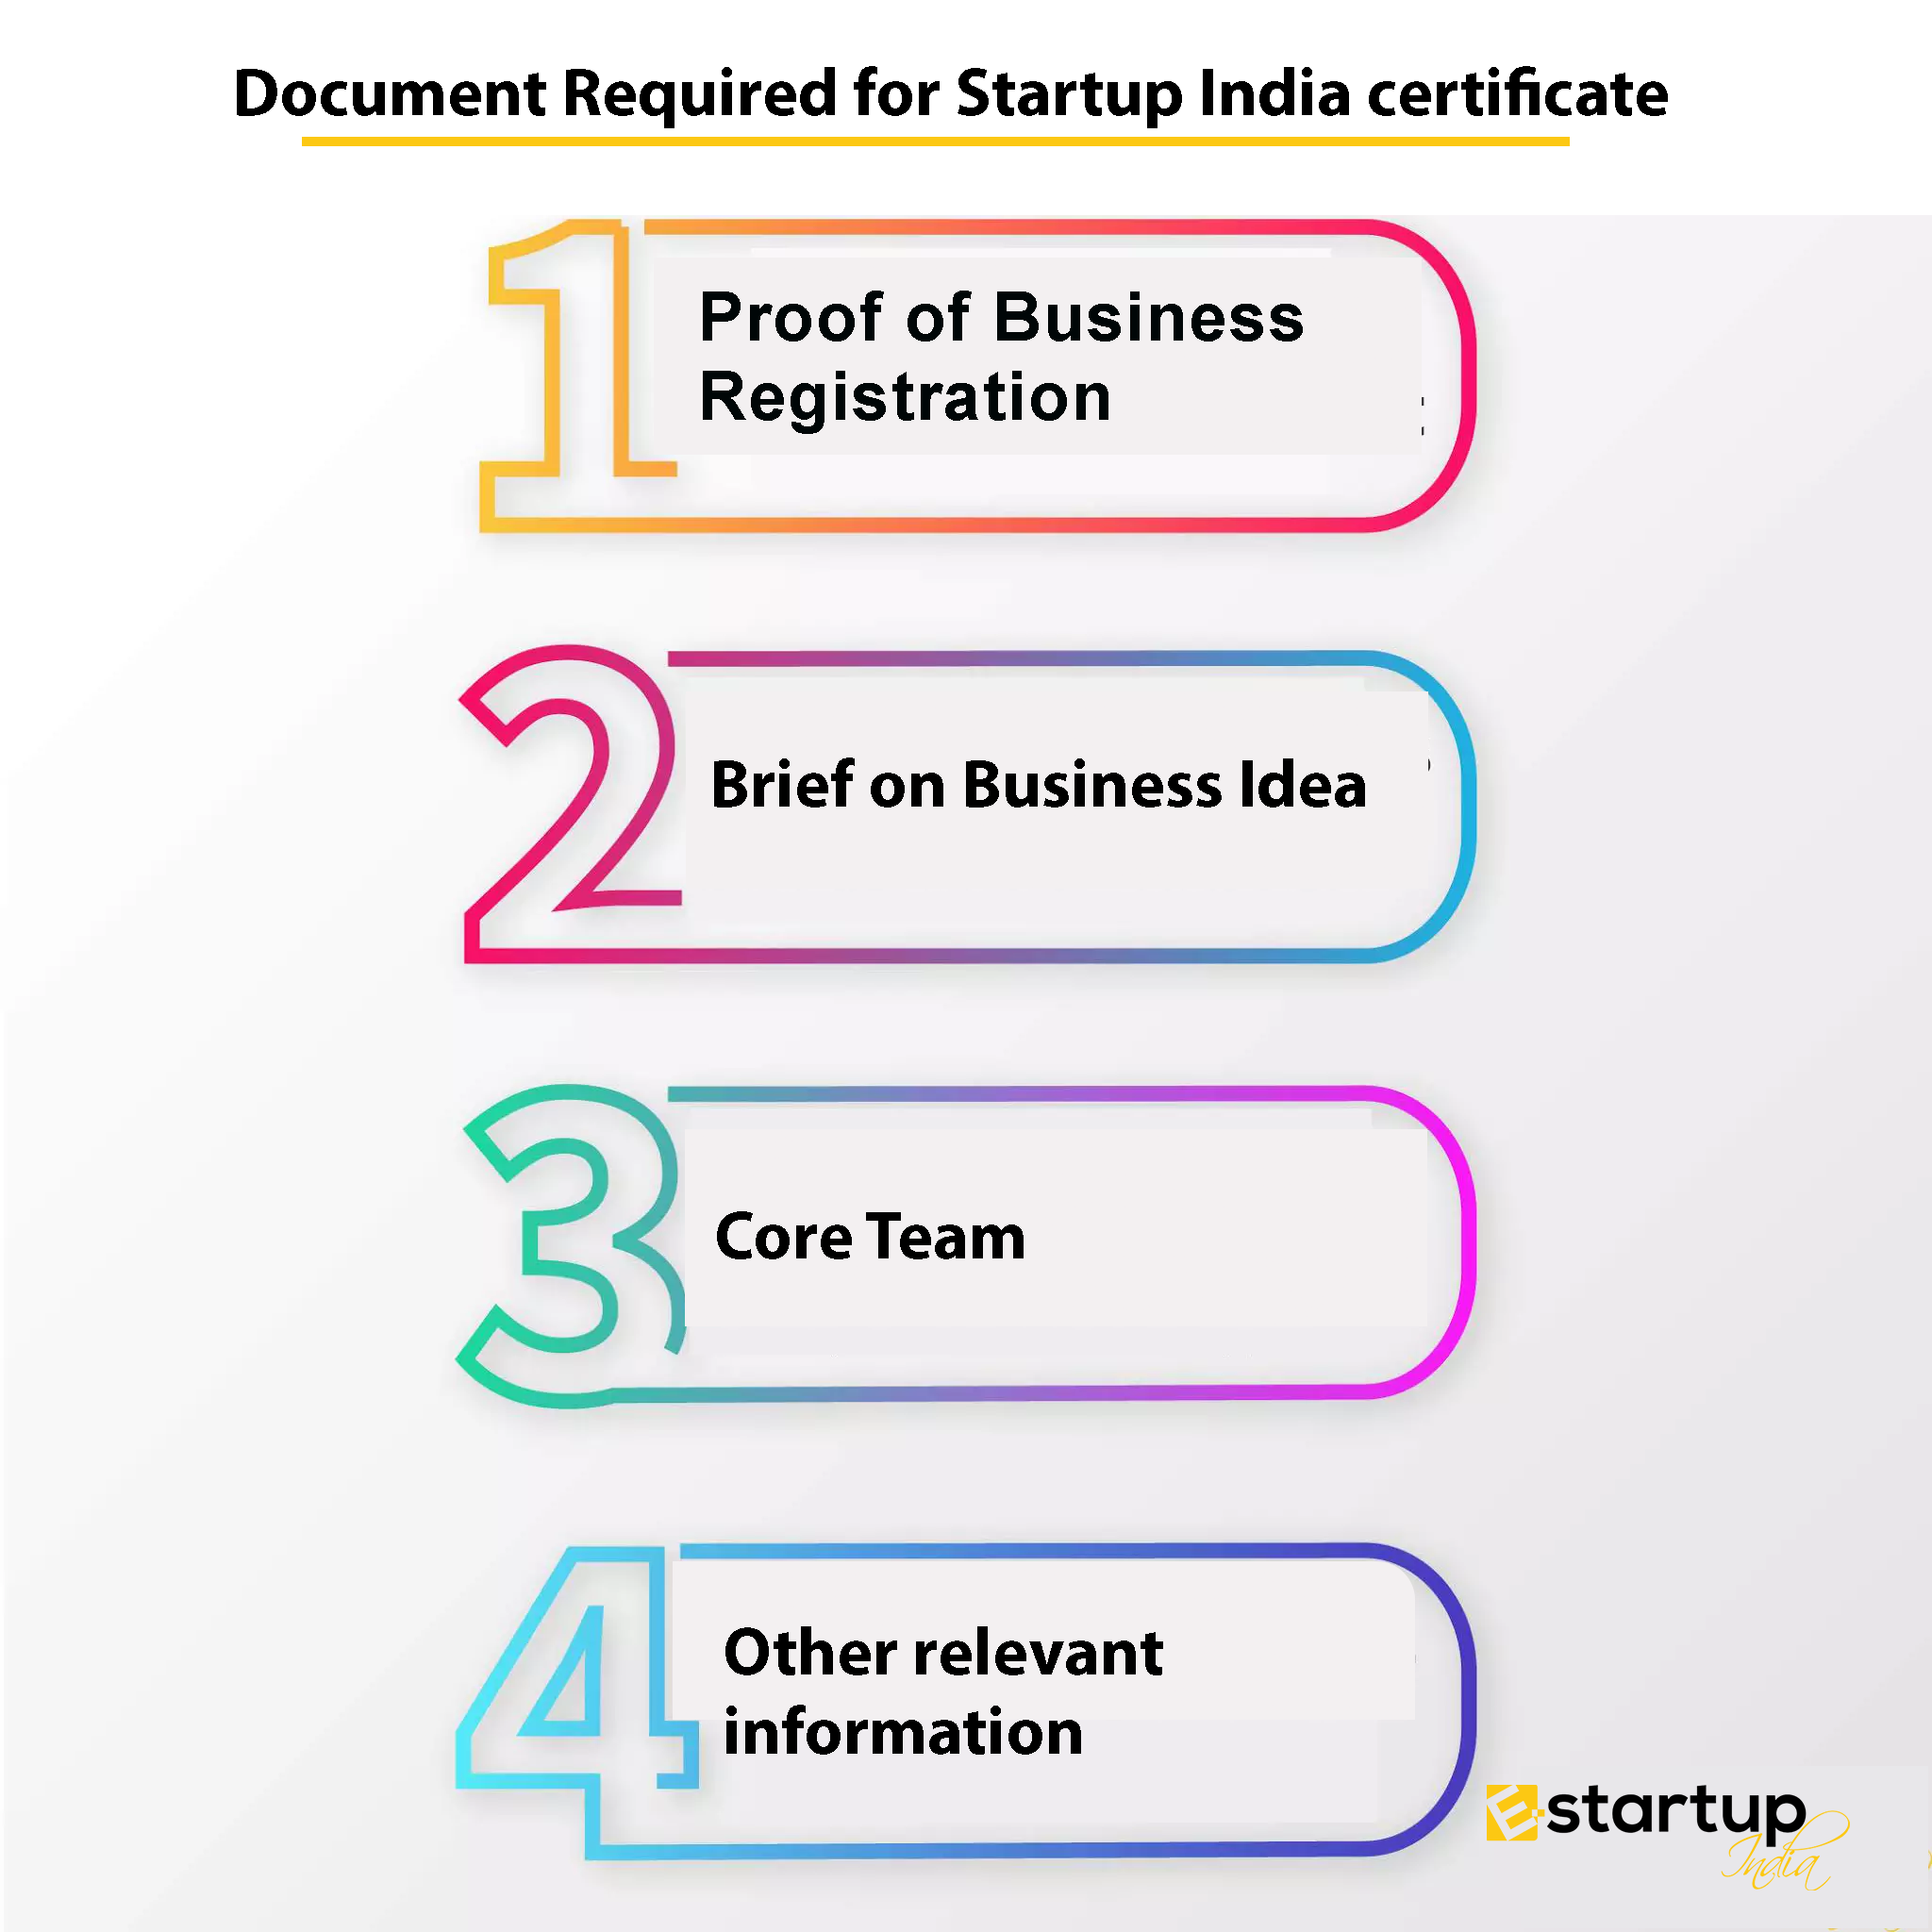 Document Required for Startup India certificate